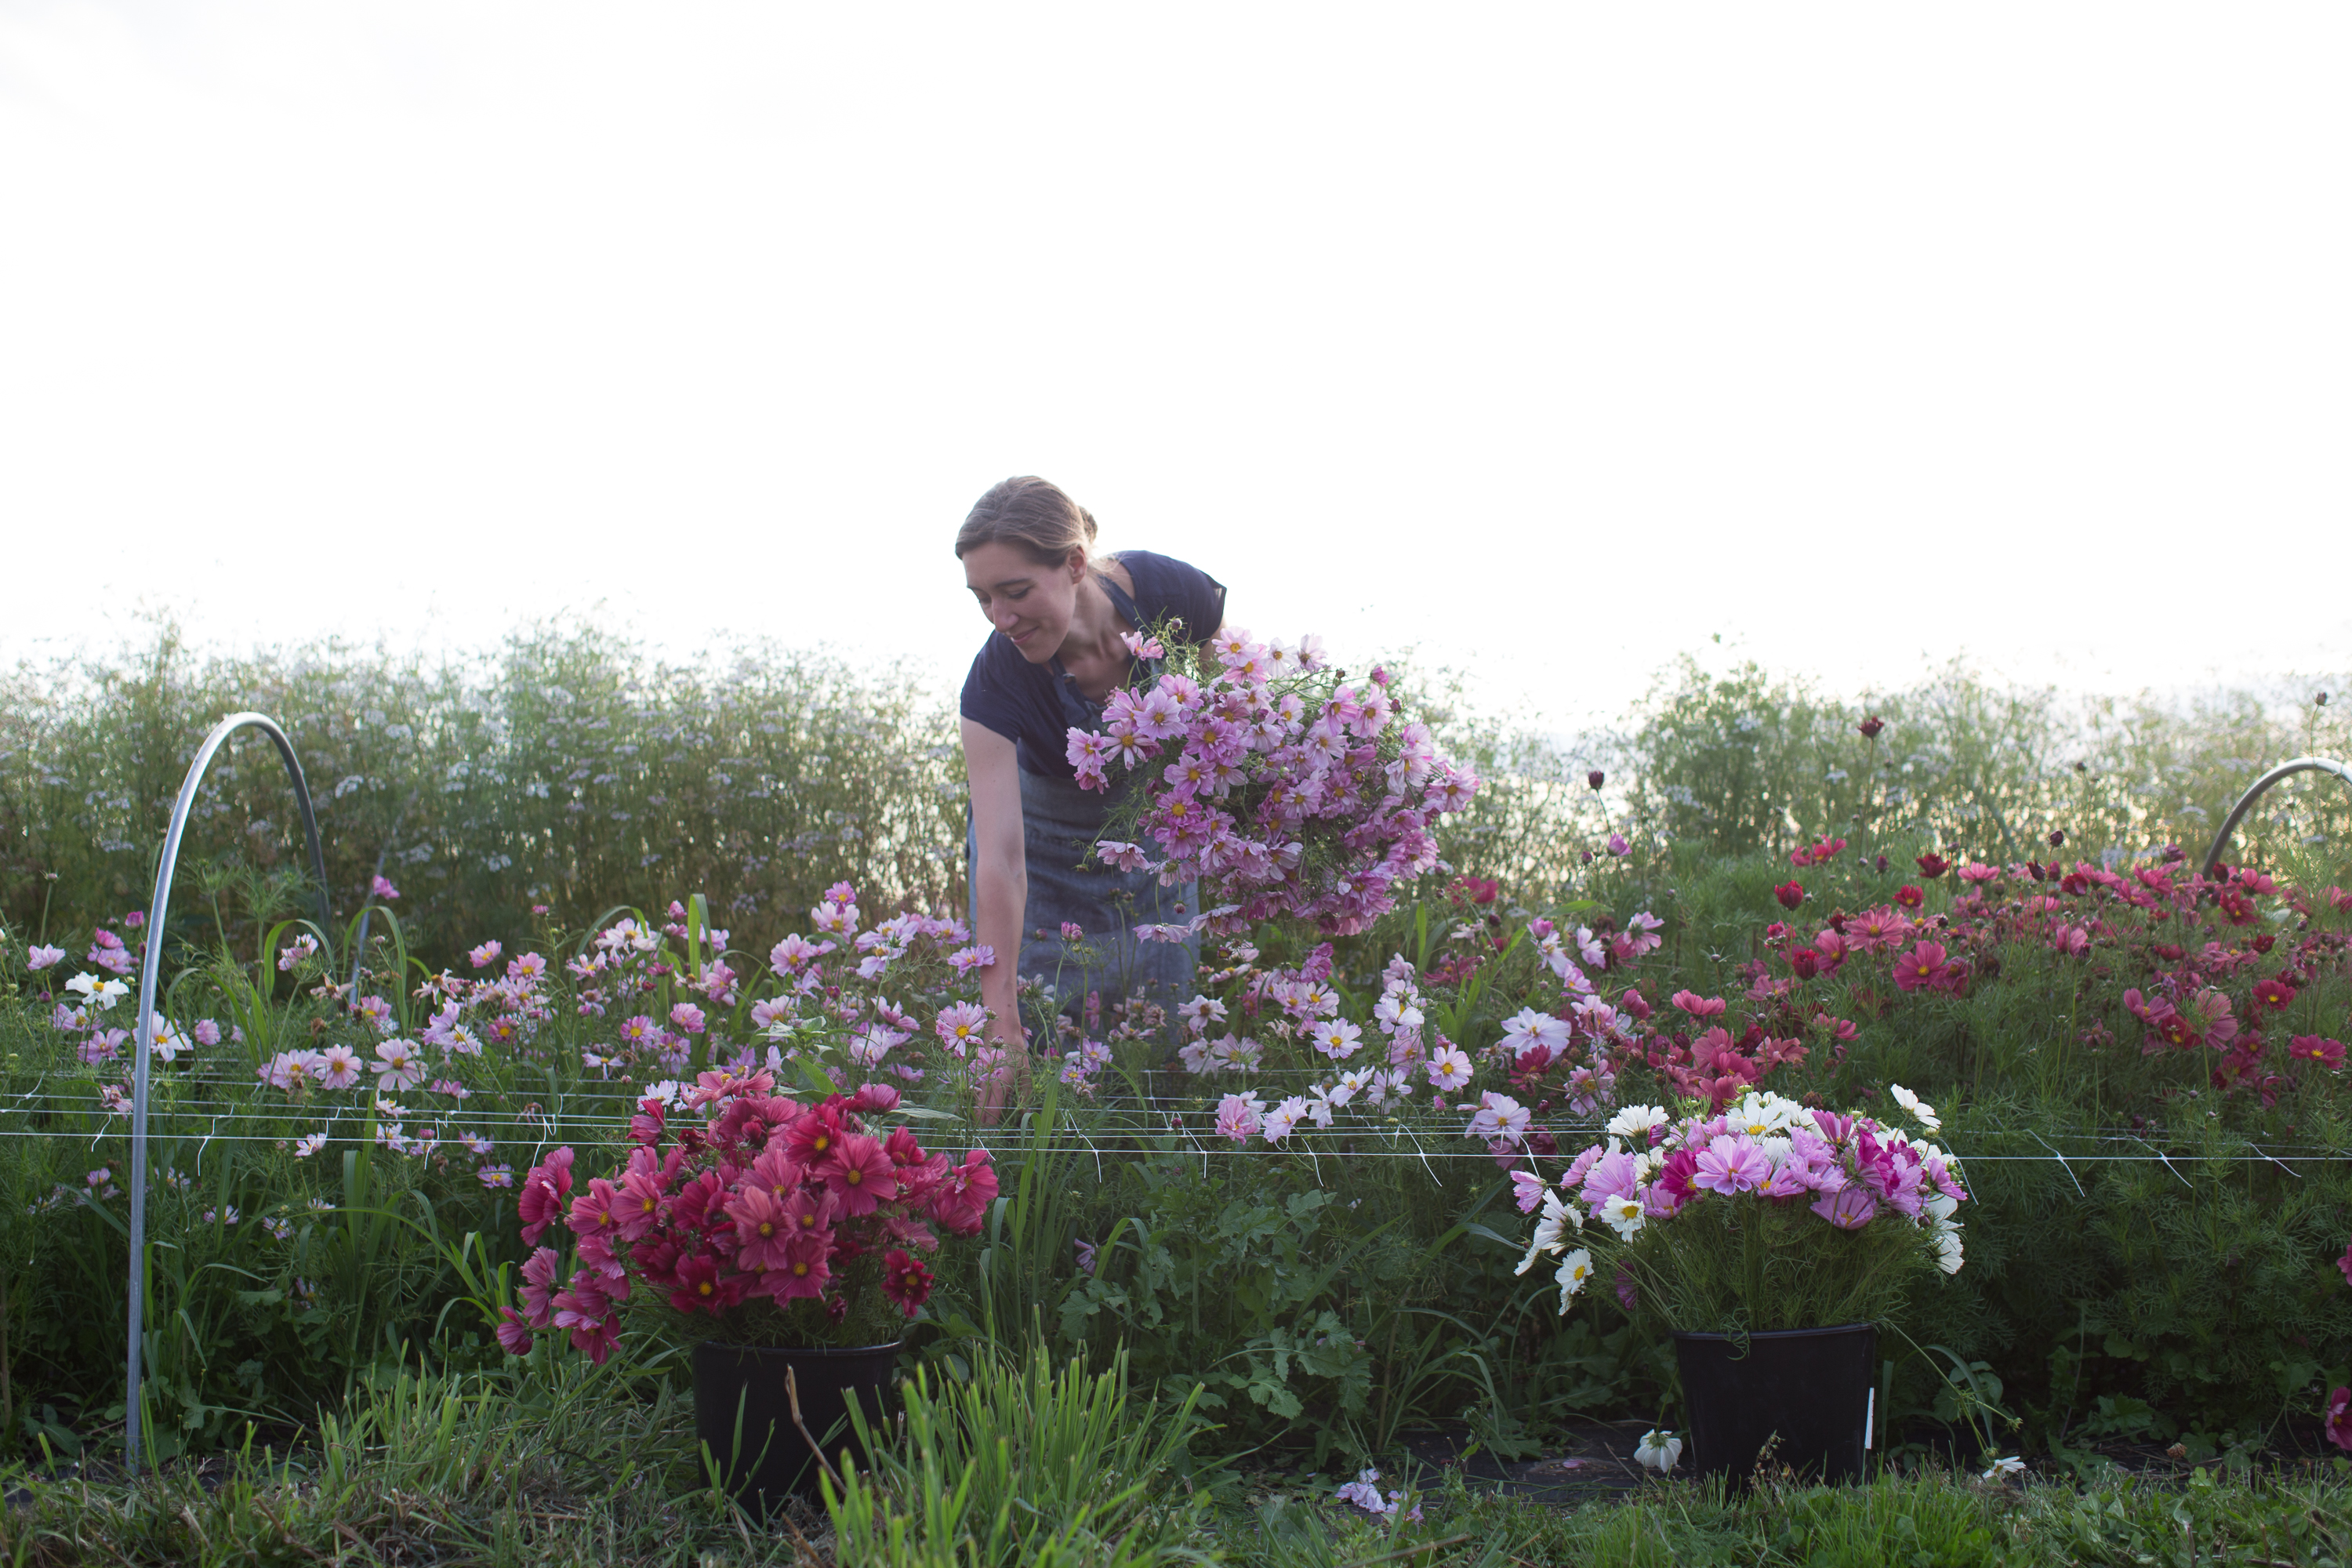 Erin Benzakein harvesting cosmos flowers in a field